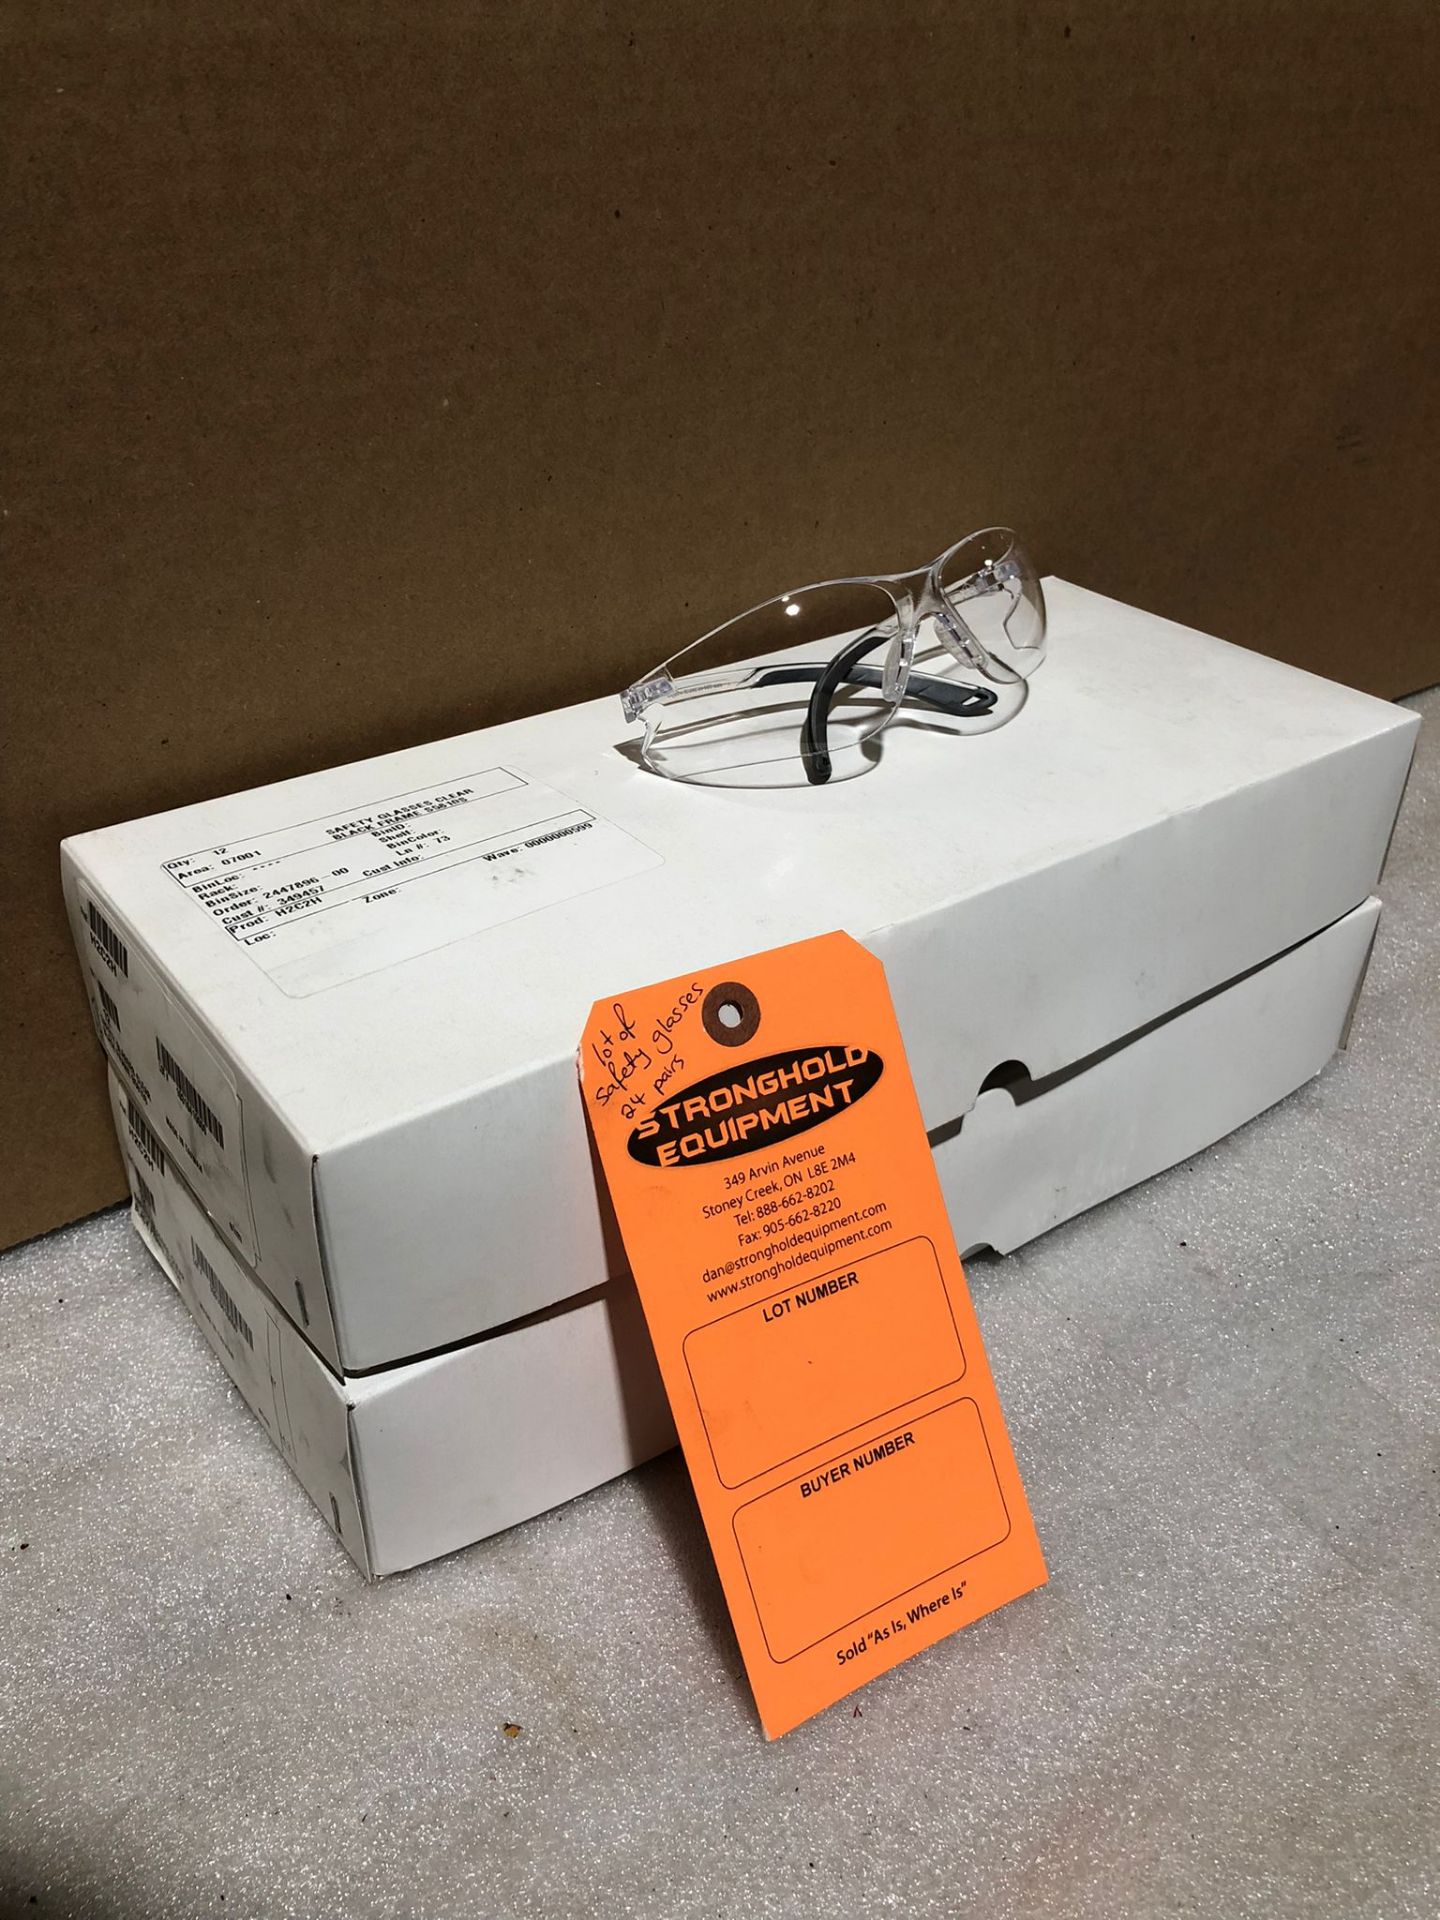 Lot of 24 (24 sets) Brand New Safety Glasses - Image 3 of 3